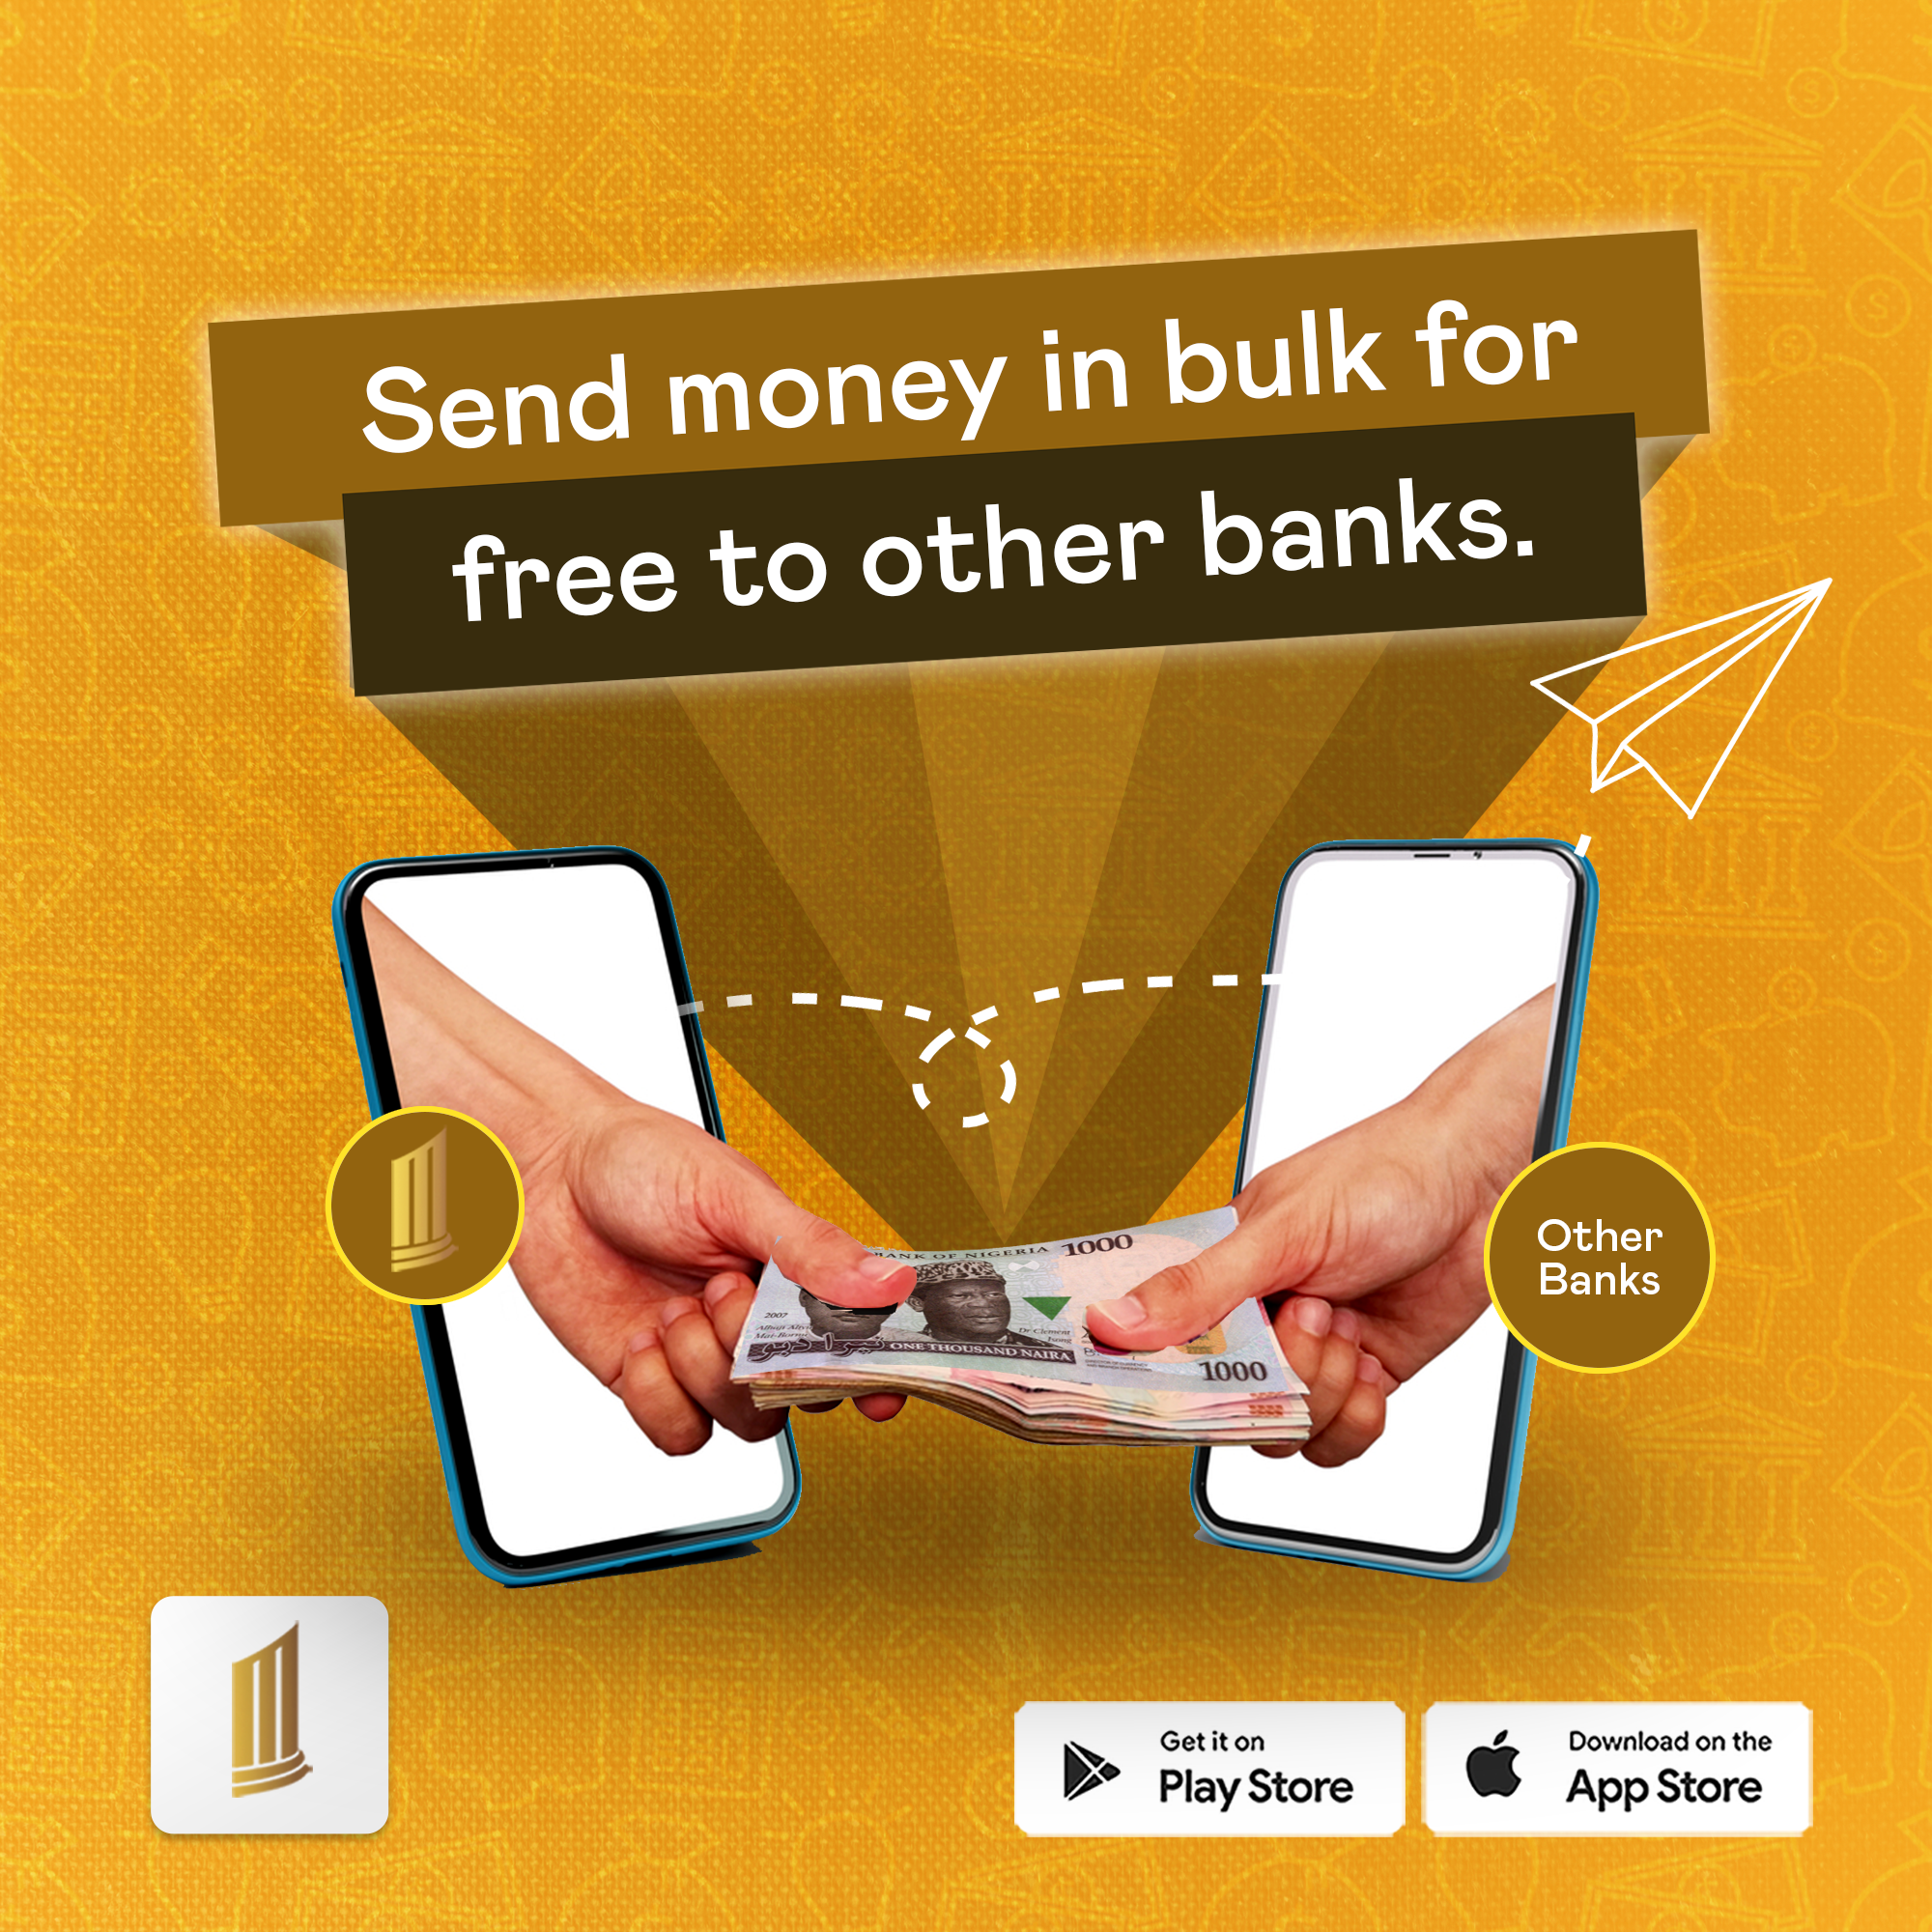 Send money in bulk for free to other banks